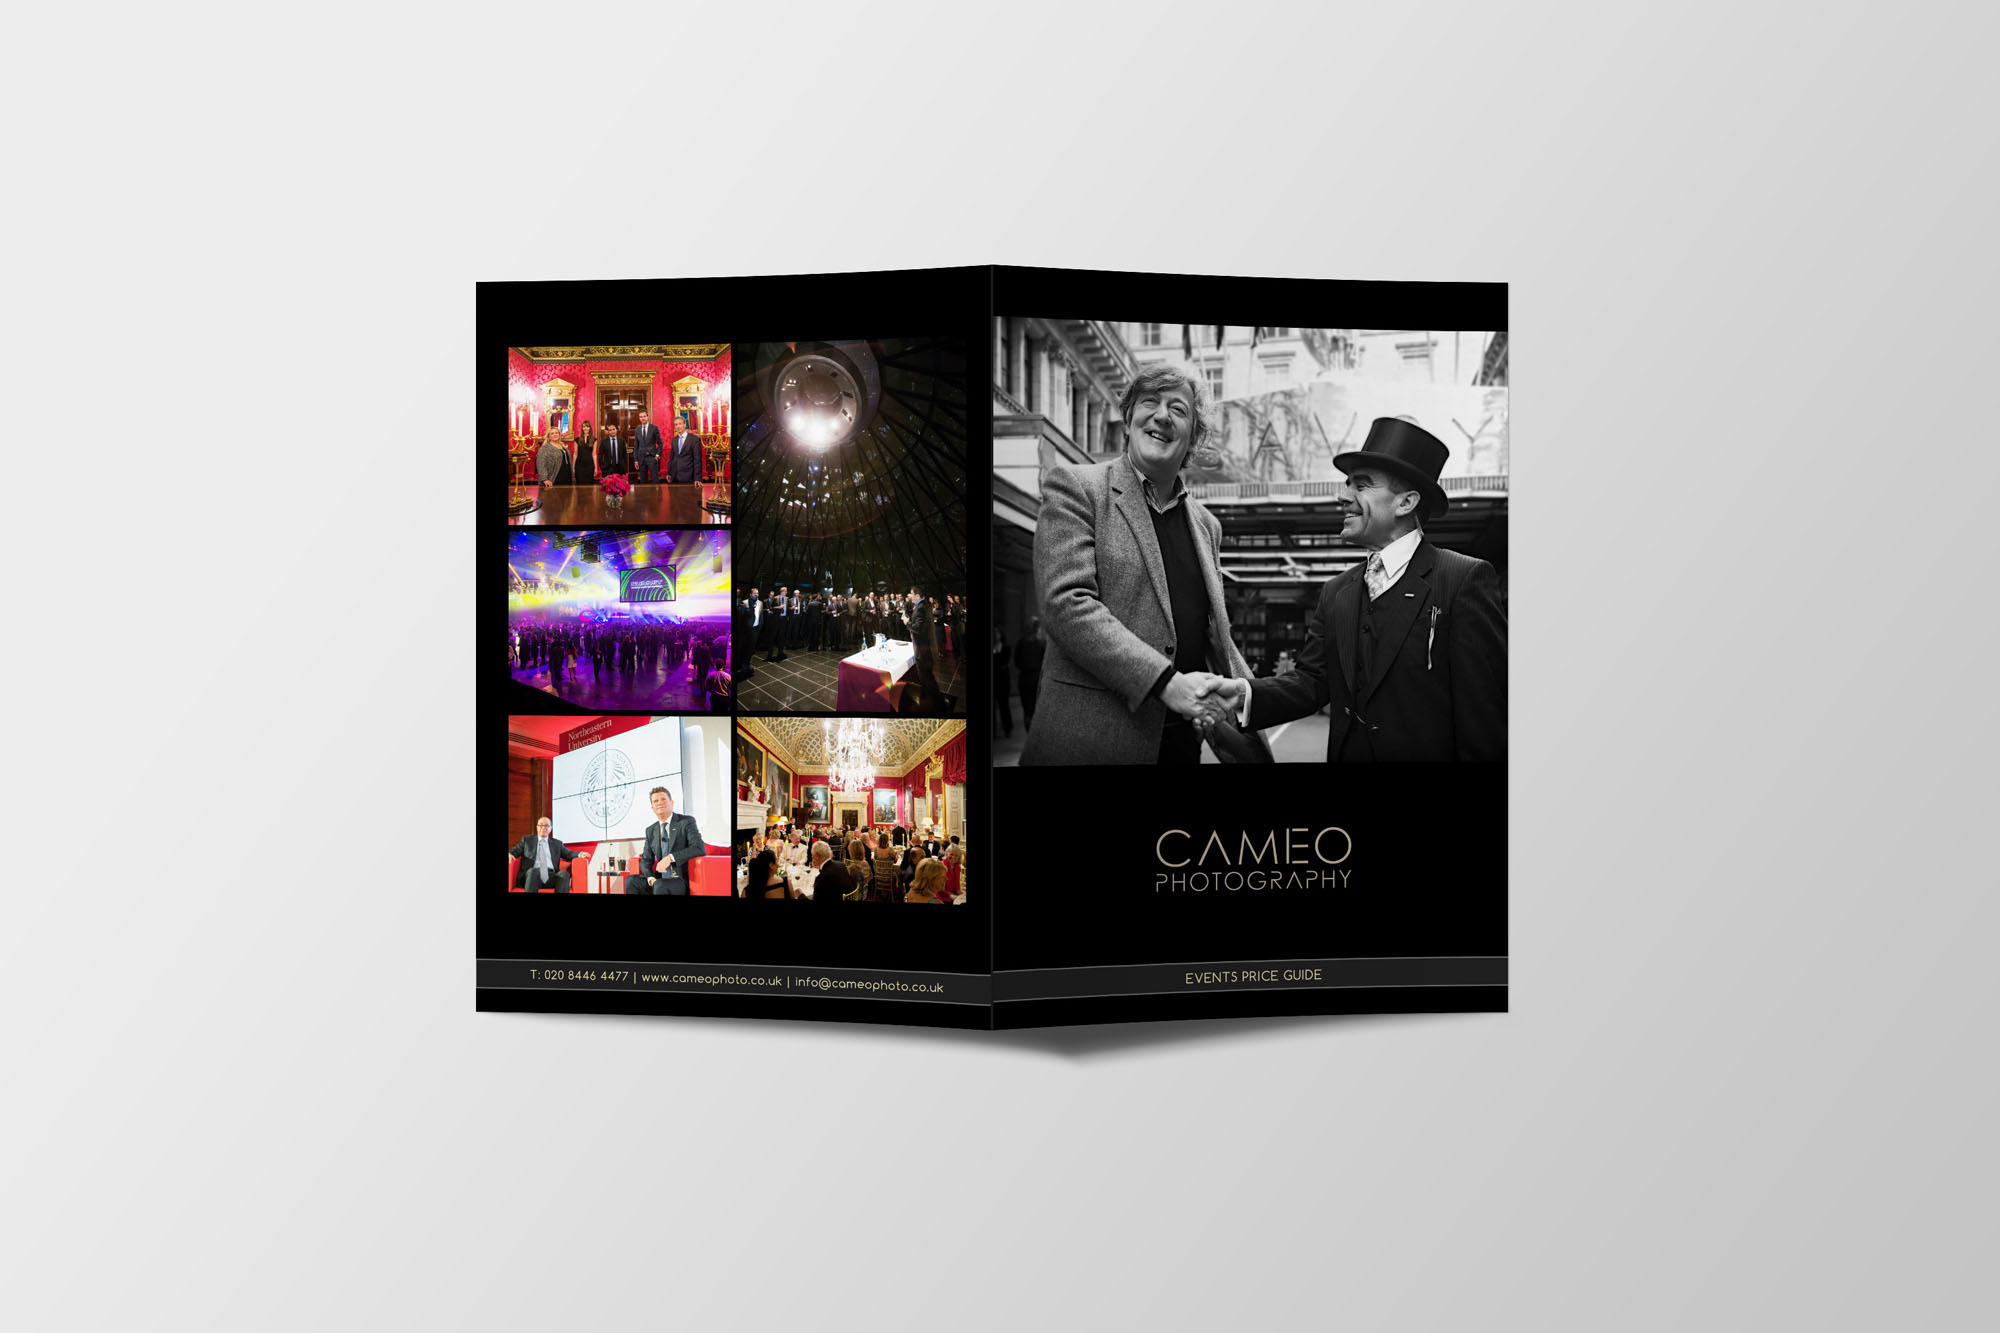 Cameo Photography Marketing and Advertising Design Project